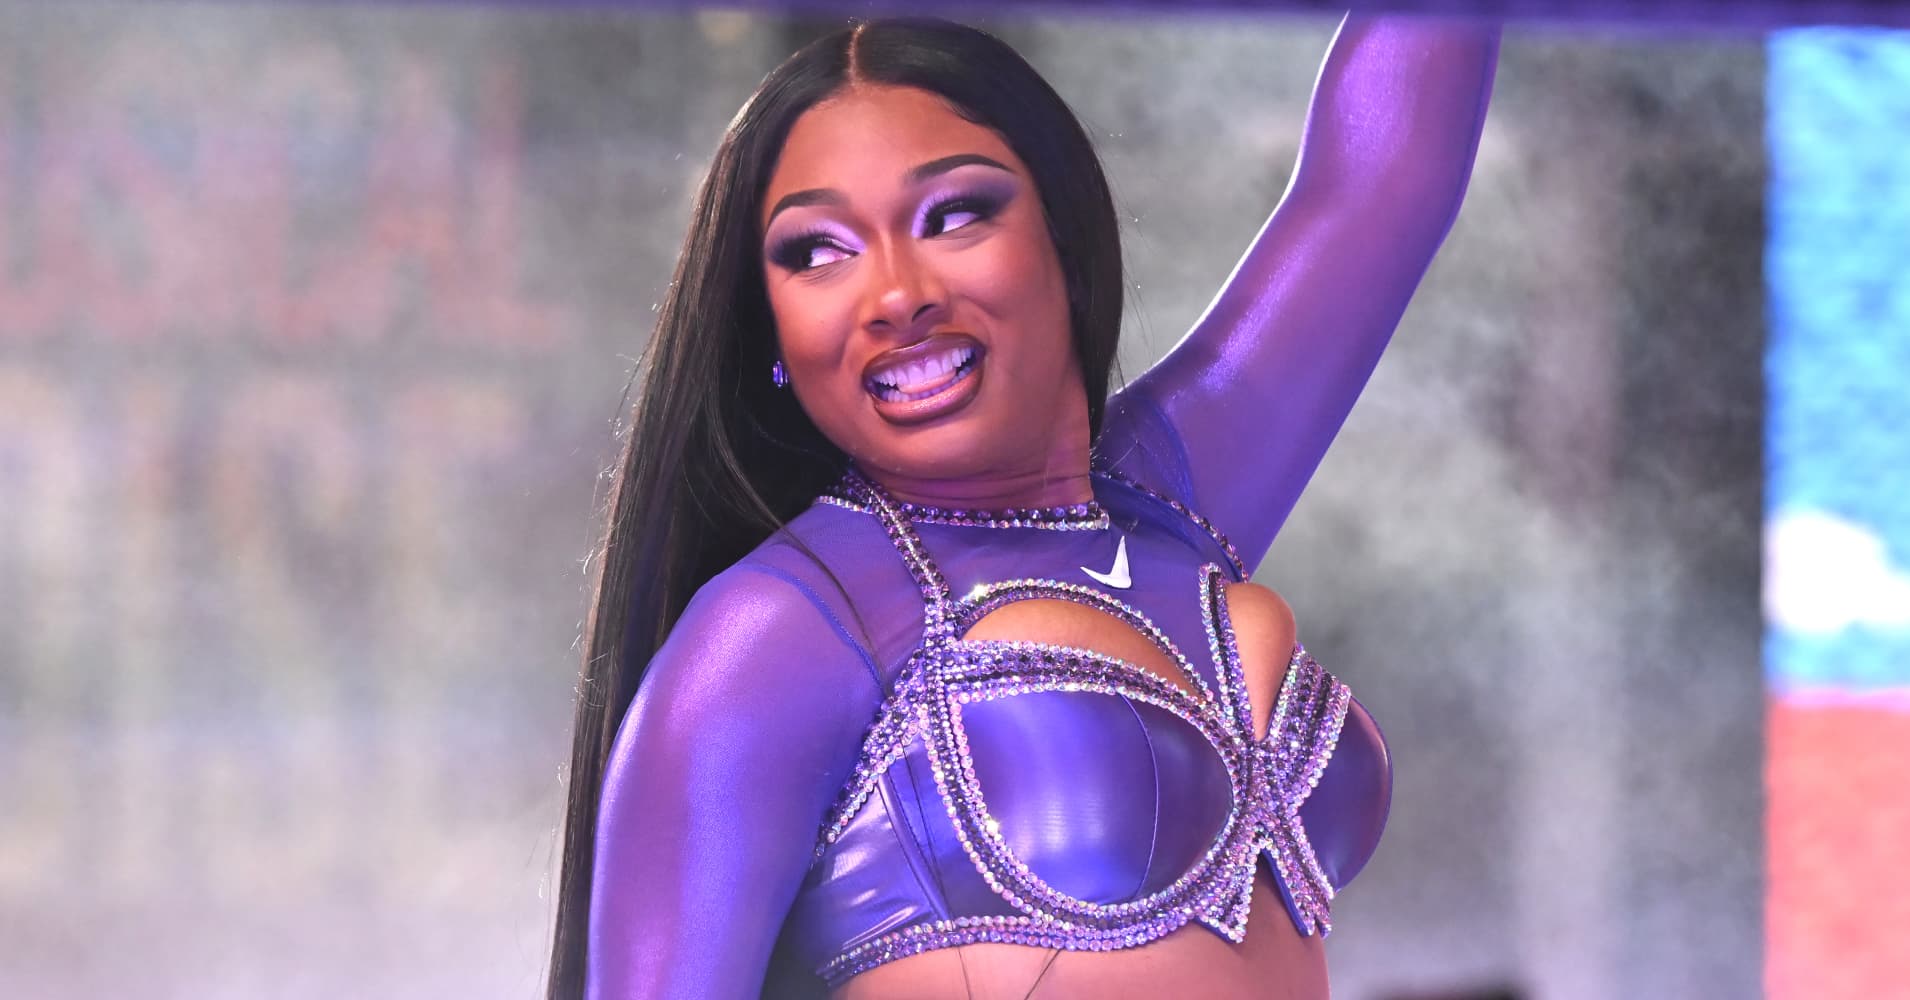 megan thee stallion's diet, fitness and mental wellness routine: 'i want to look as good as i feel'